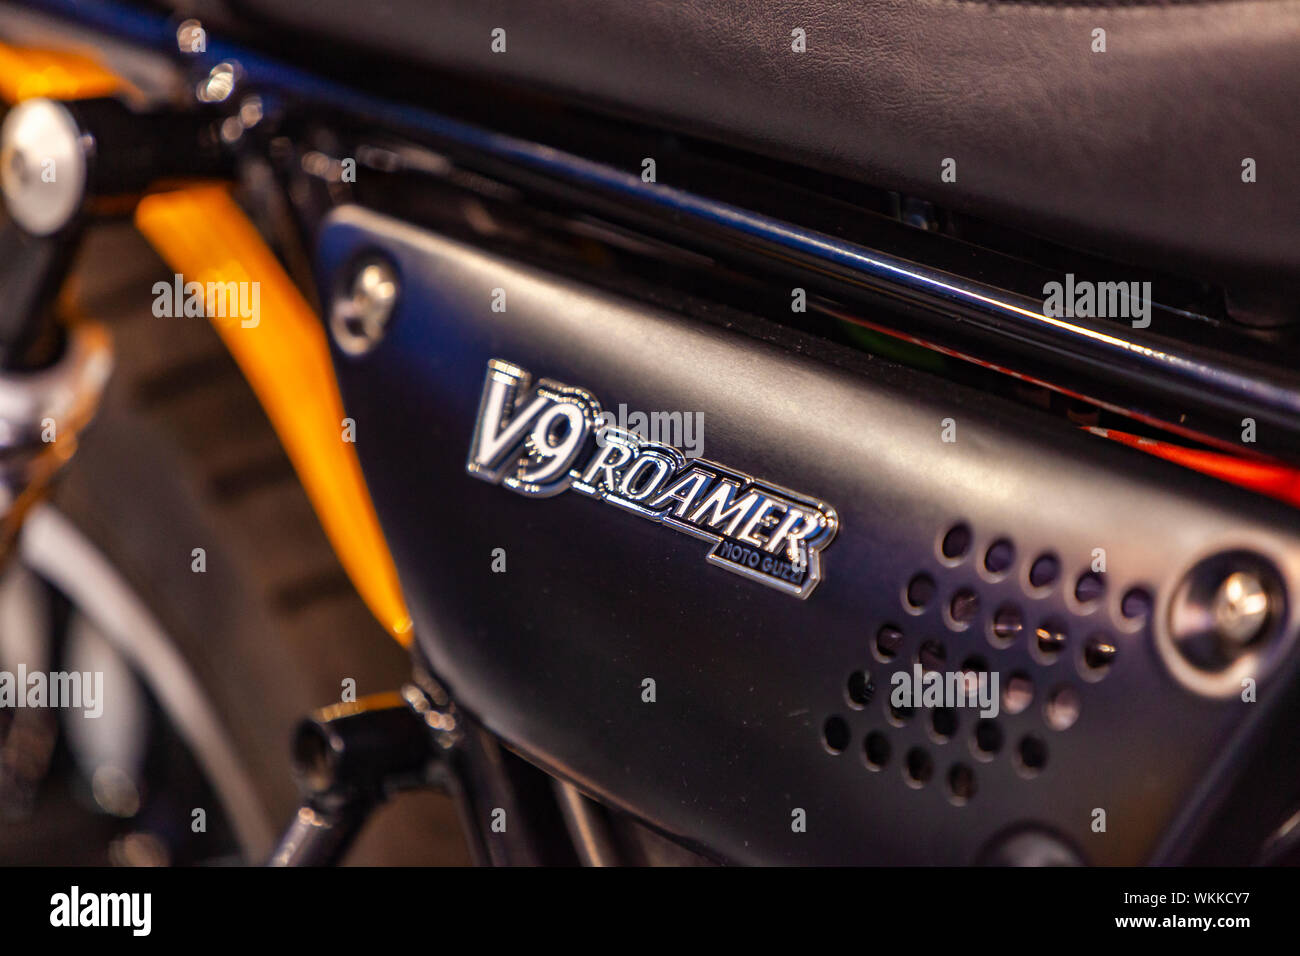 Detail of the Moto Guzzi V9 Roamer motorcycle. Moto Guzzi is an Italian motorcycle manufacturer founded at 1921. Stock Photo